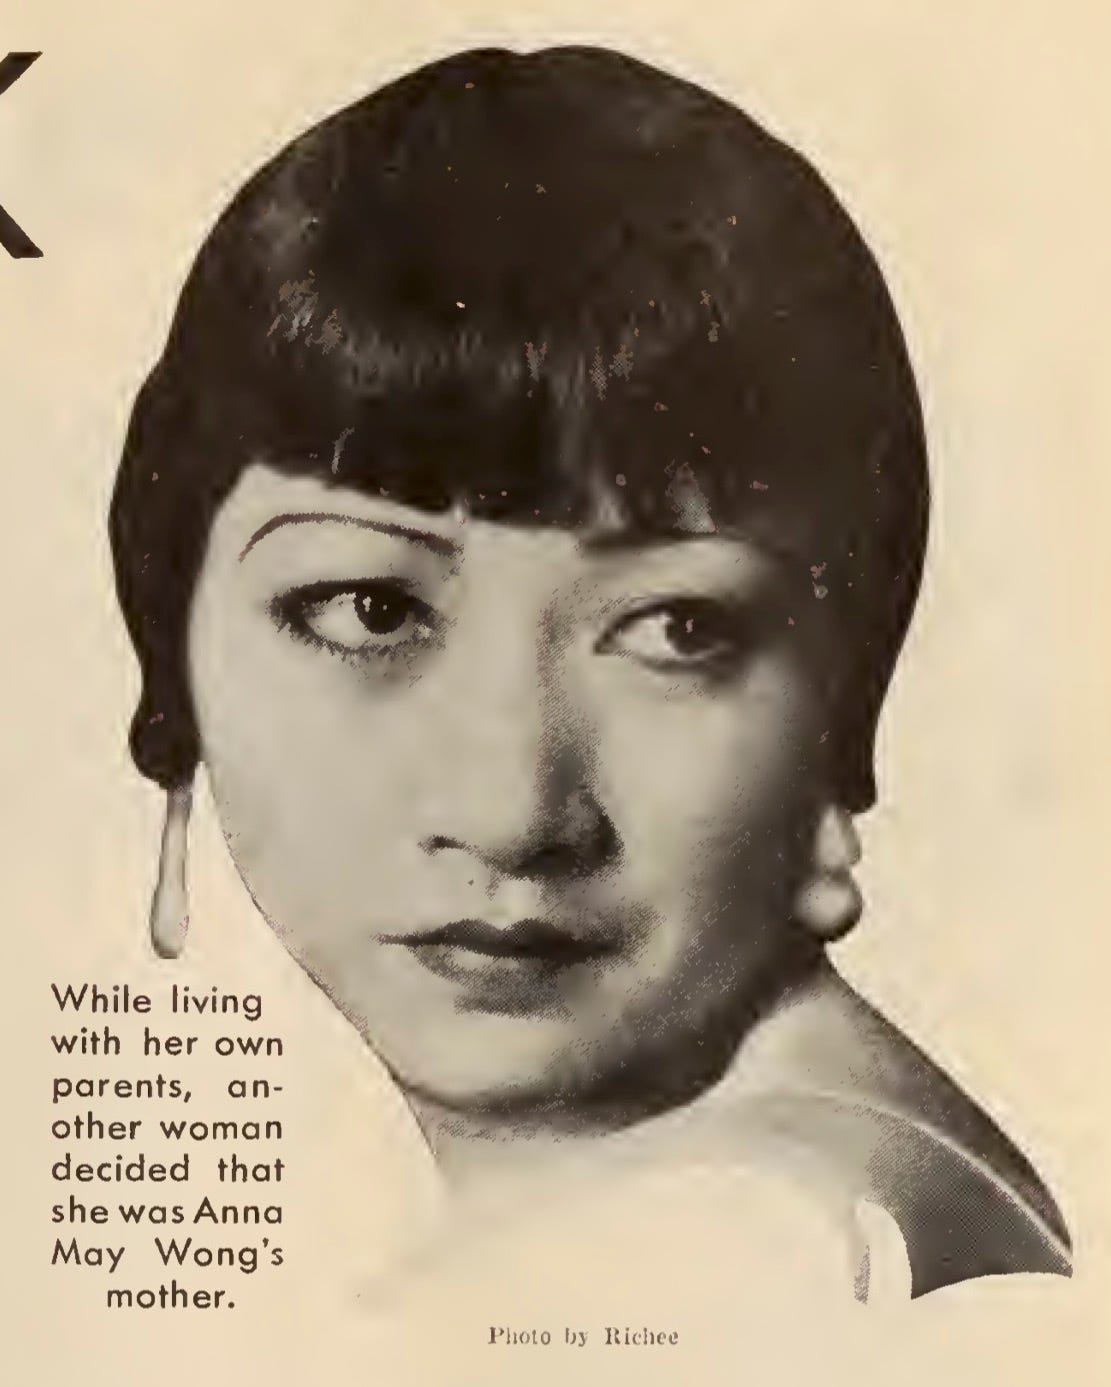 clipping from Picture Play, August 1932 with caption that reads: "While living with her own parents, another woman decided that she was Anna May Wong's mother."